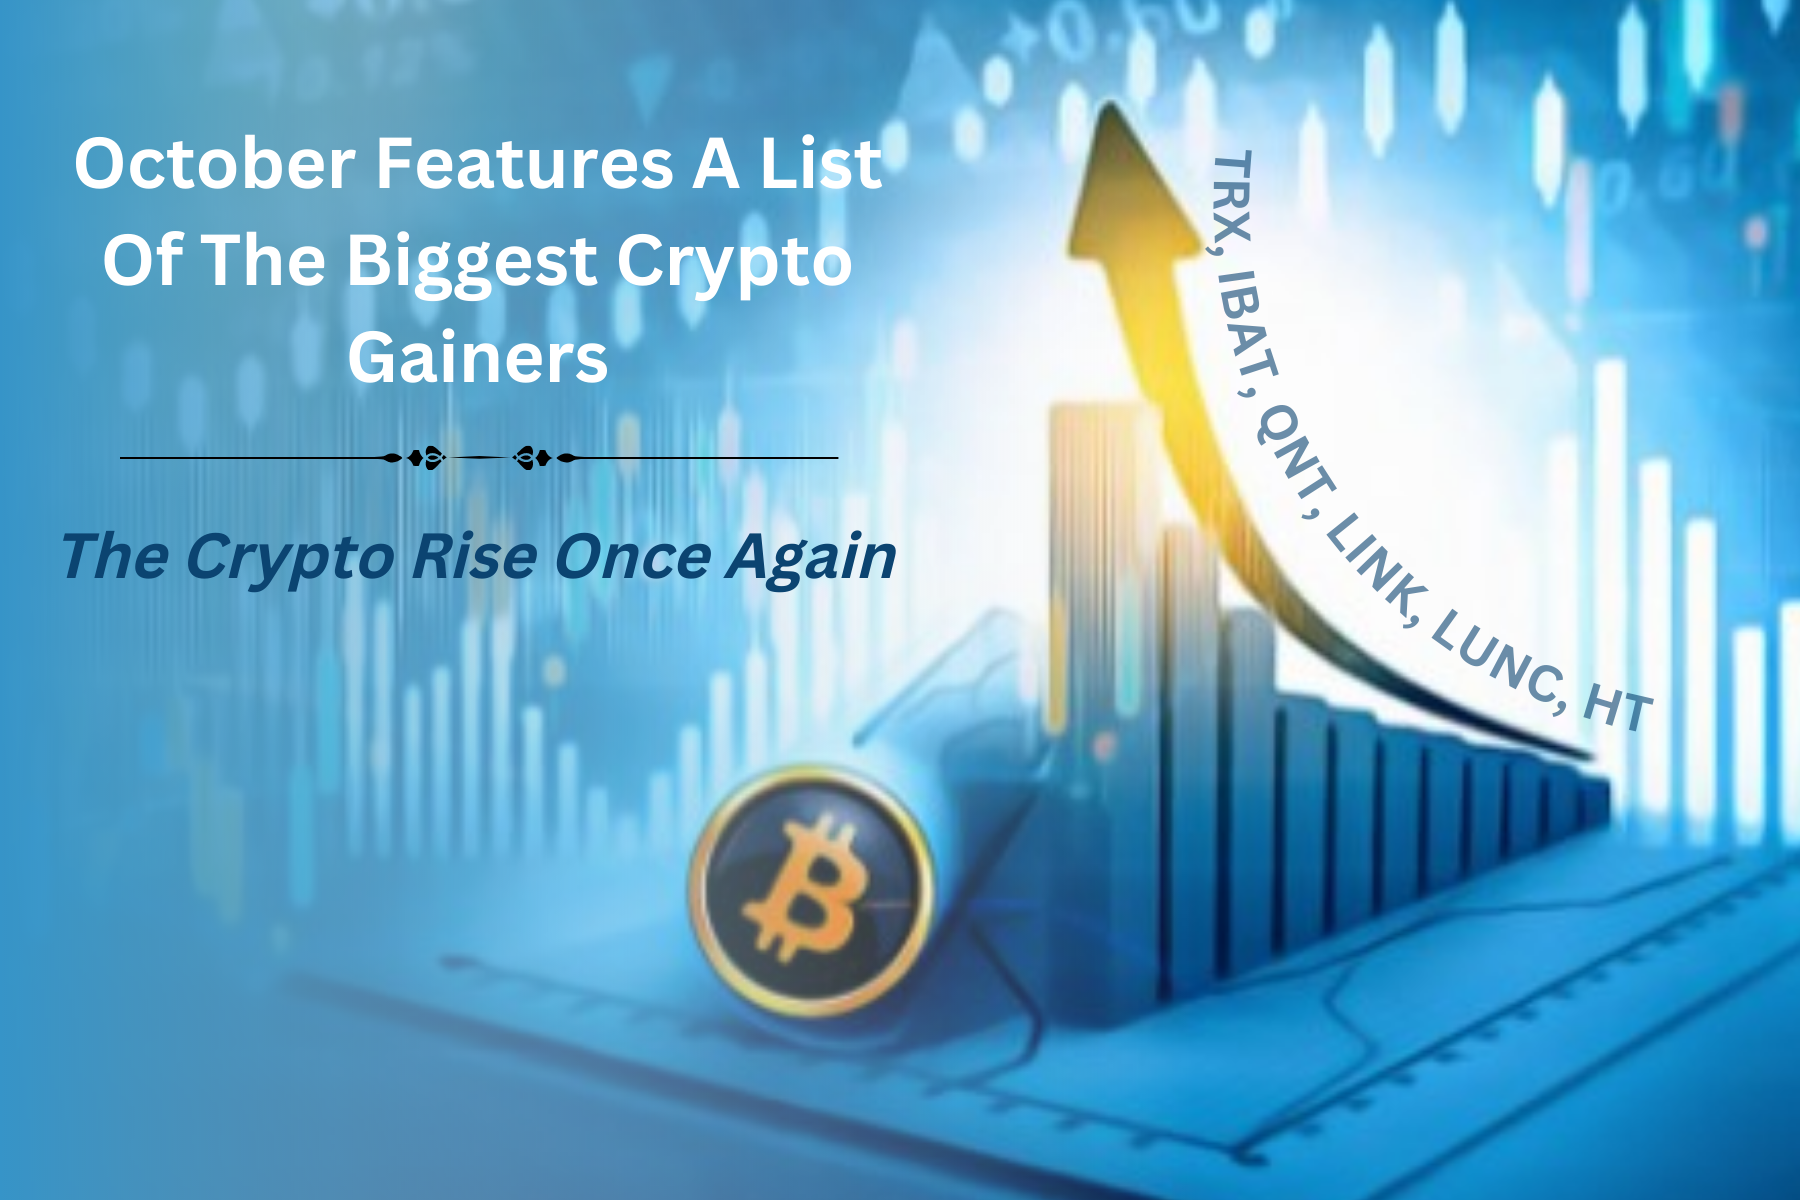 October Features A List Of The Biggest Crypto Gainers - The Crypto Rise Once Again